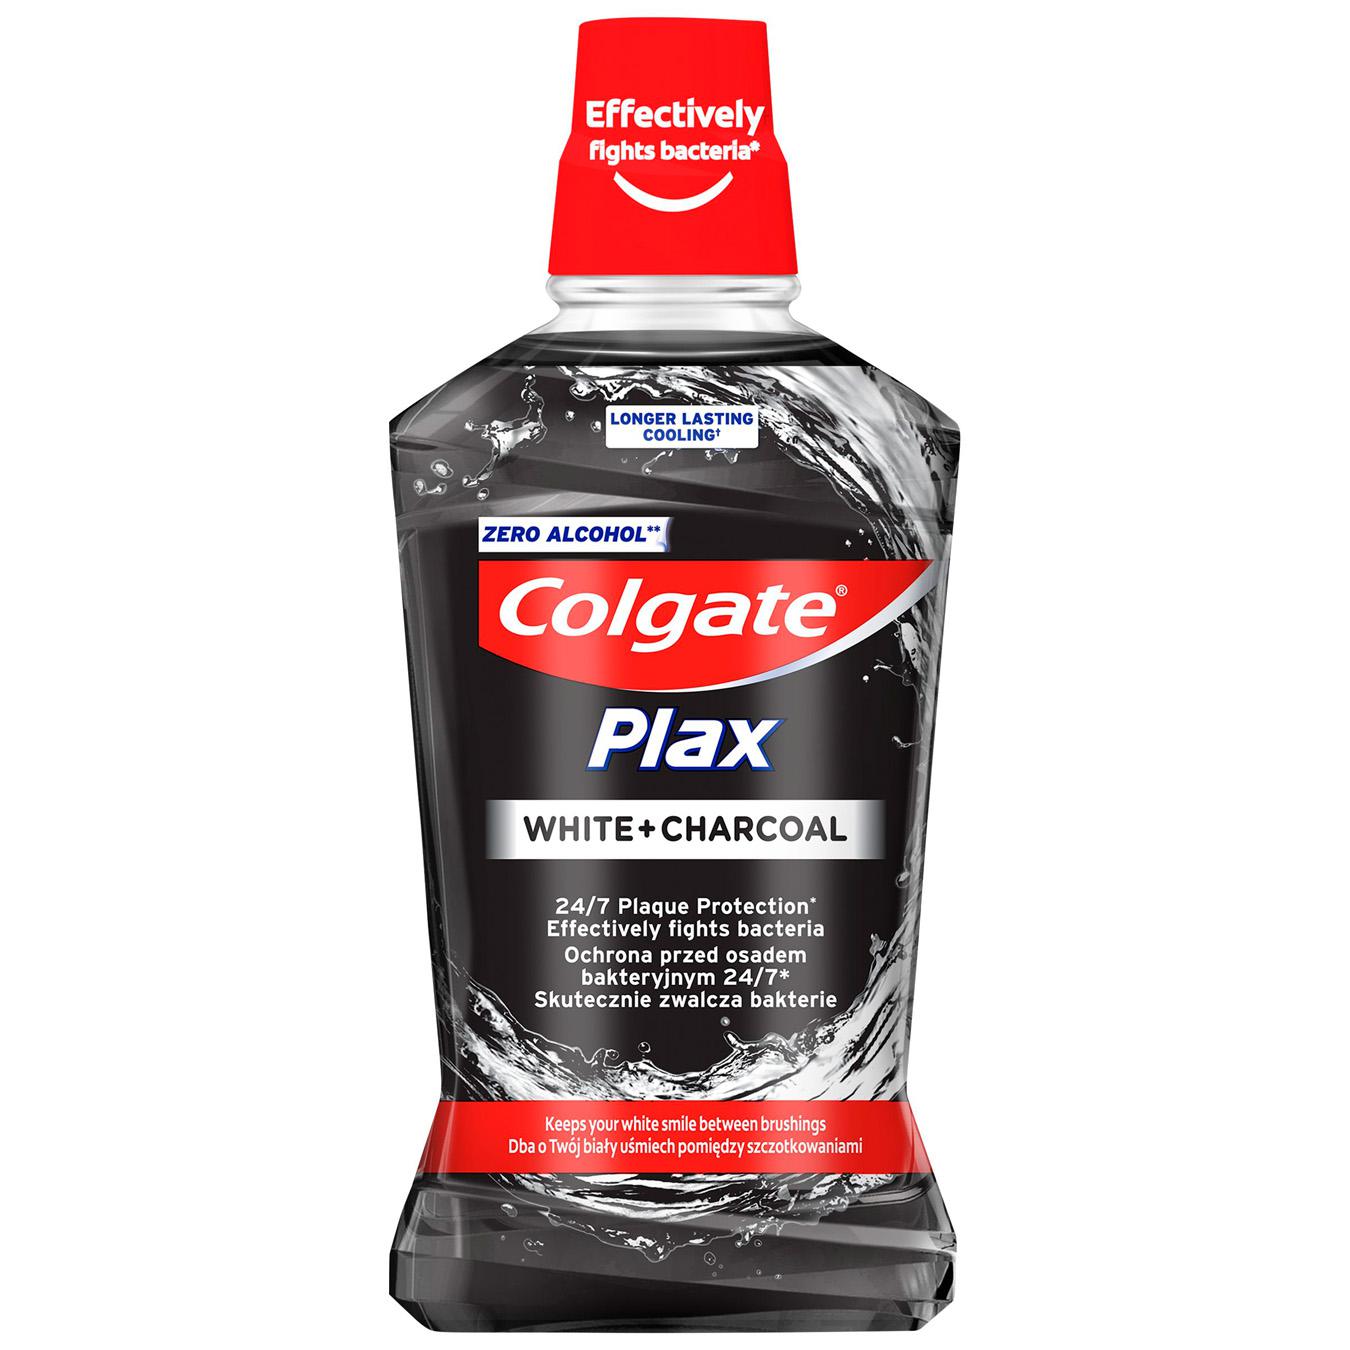 Colgate Plax whitening mouthwash with charcoal 500ml